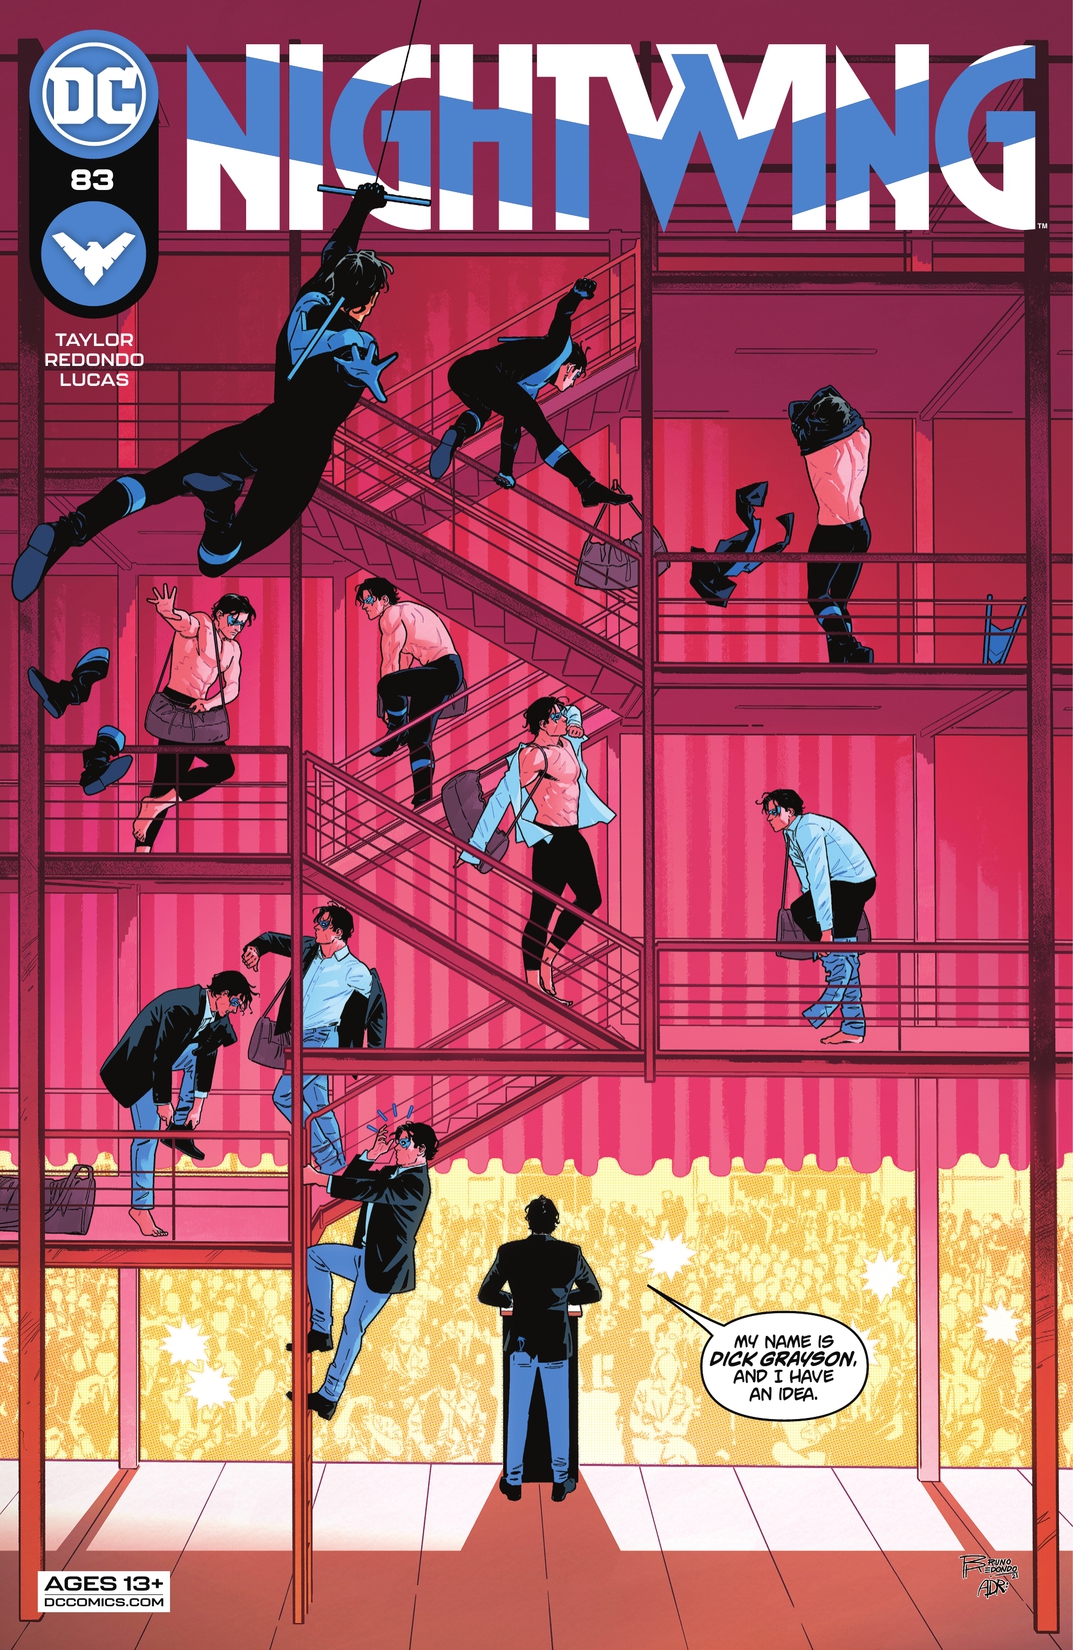 Nightwing (2016-) #83 preview images